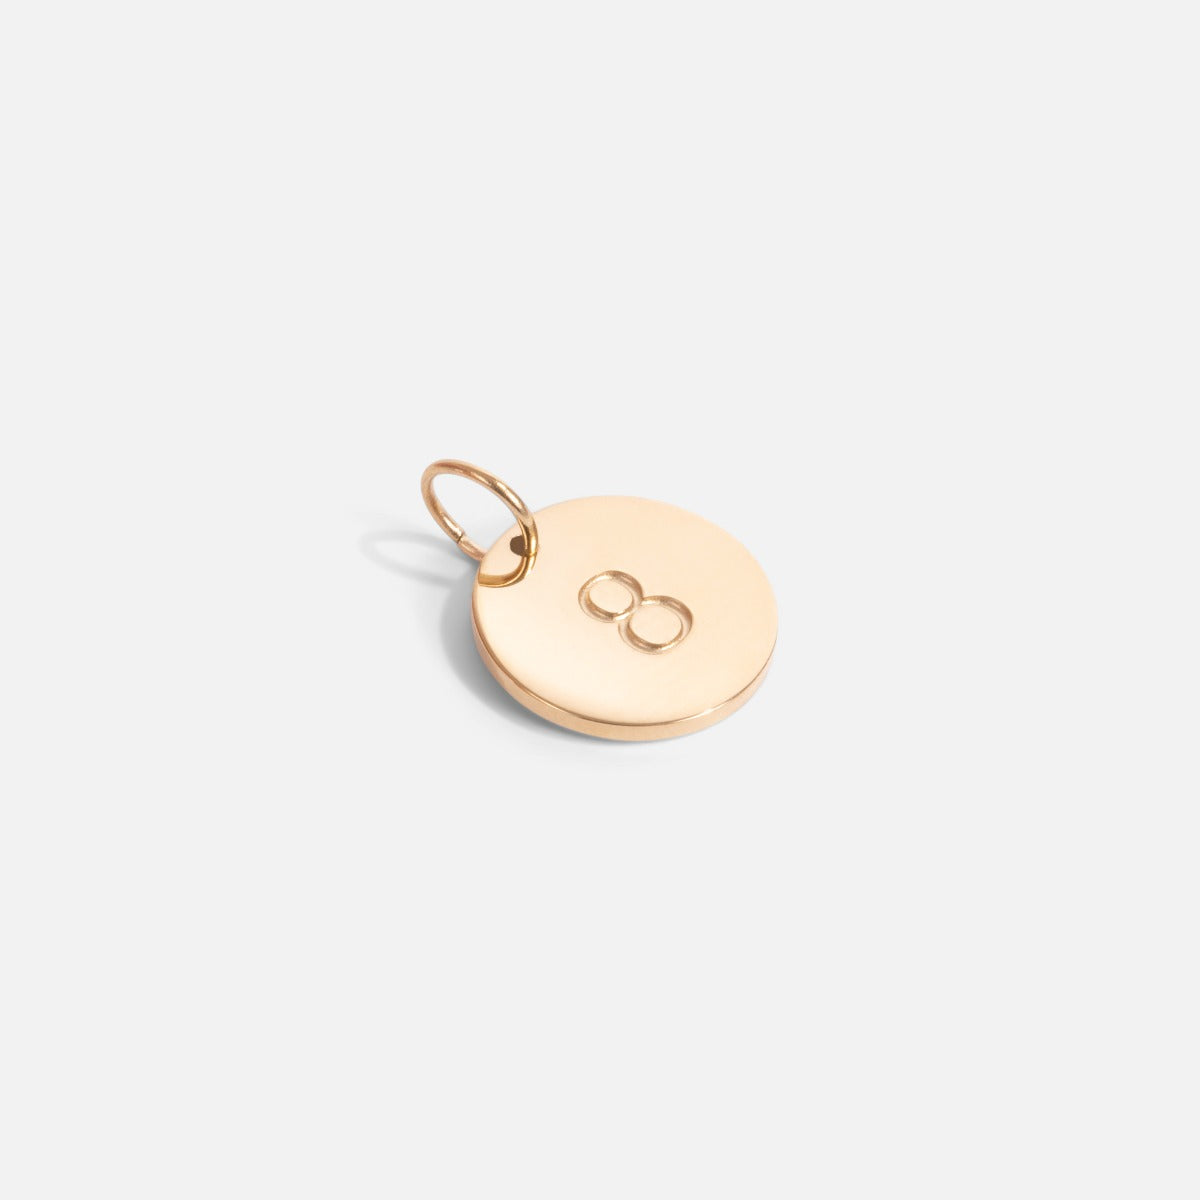 Small golden charm engraved with the number "8"   